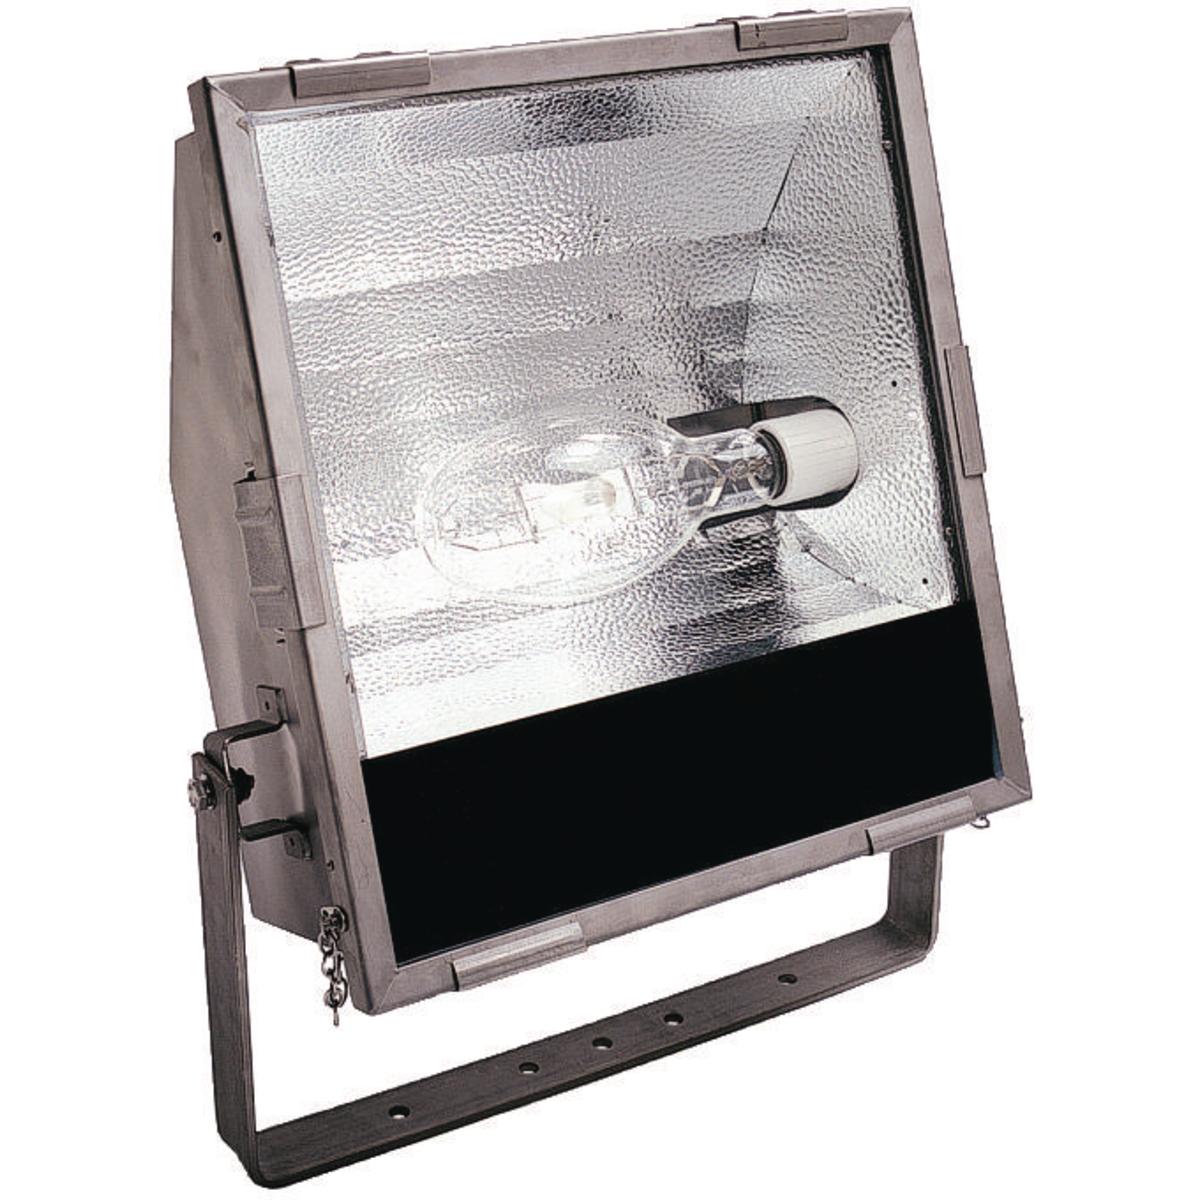 Hubbell KFS400SSNR KFSS Series - Stainless Steel 400 Watt High Pressure Sodium Ex nR Marine Floodlight (Lamp Not Included) - Quadri-Volt (120/208/240/277V) At 60Hz  ; Type 316 Stainless Steel Housing. 16-gauge housing ensures low corrosion and long life, reducing maintenanc